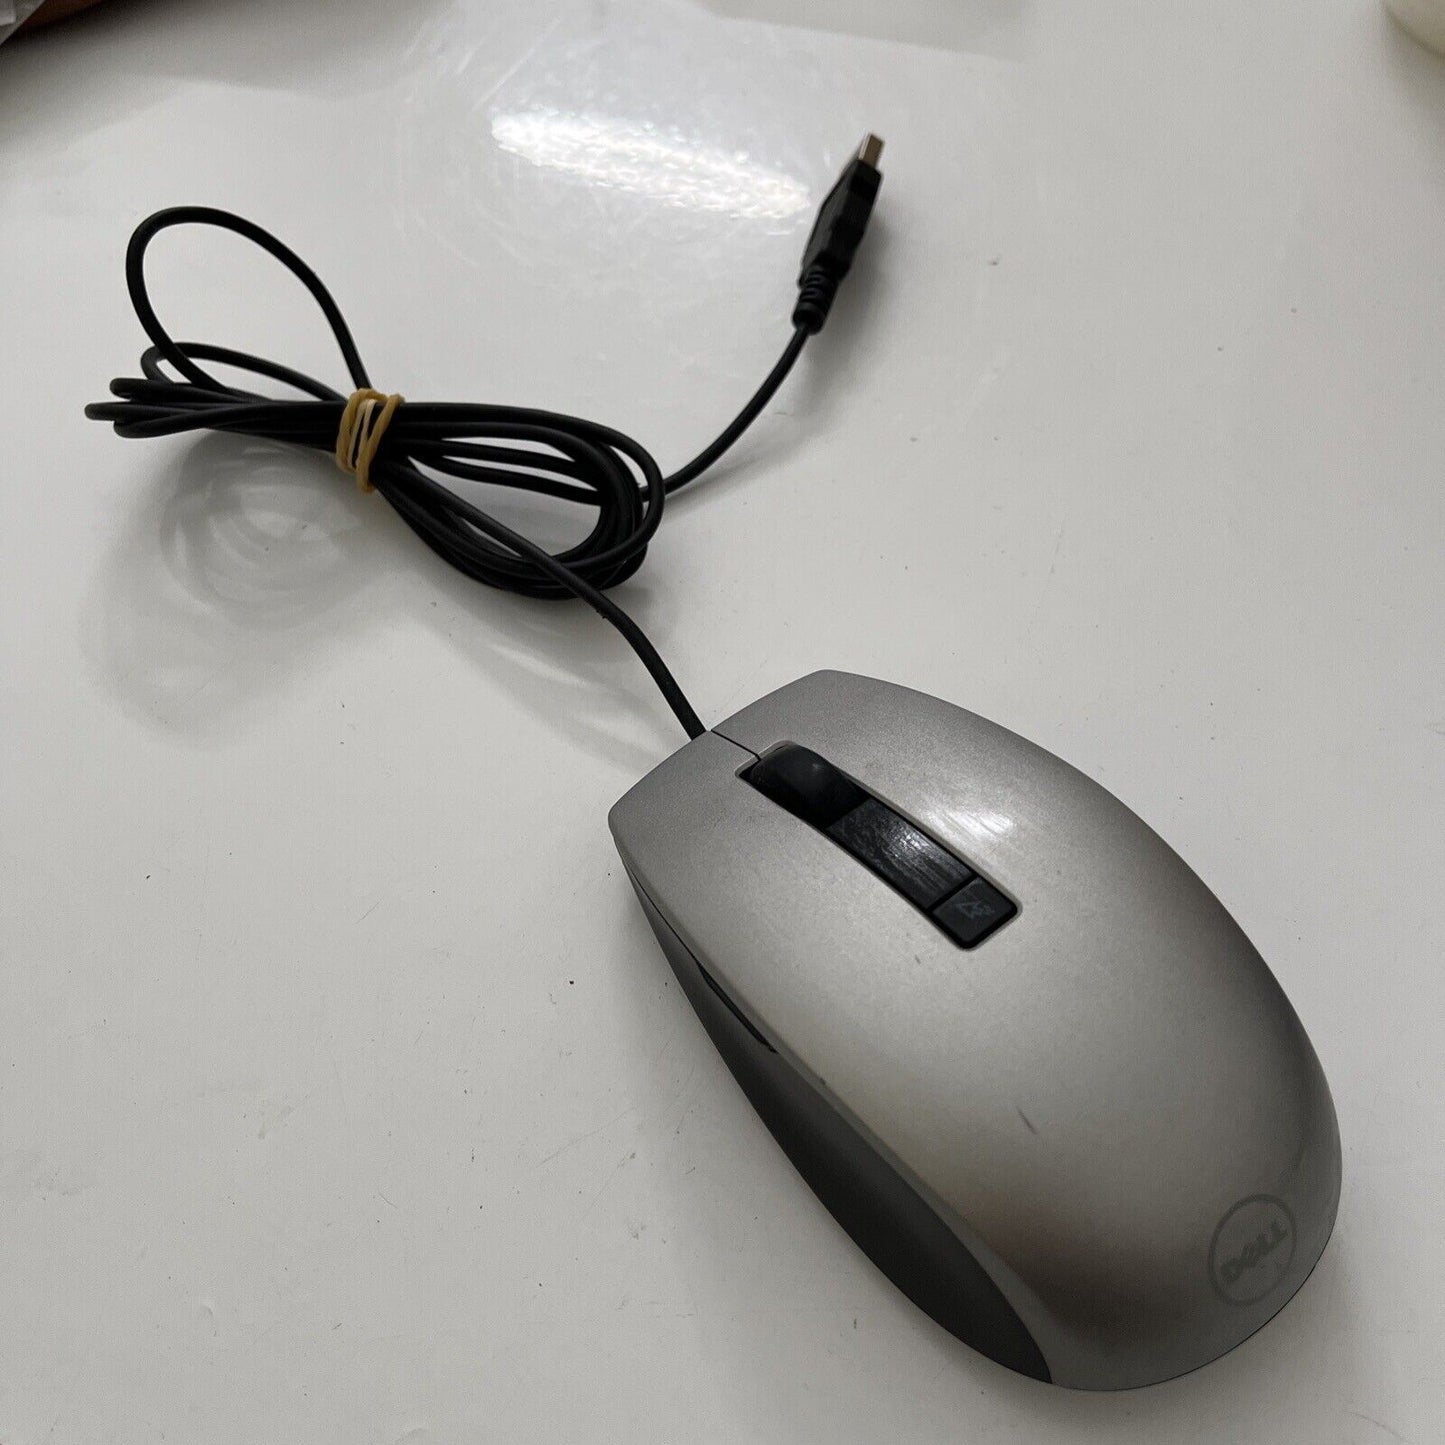 Dell Mouse USB Wired MOCZUL